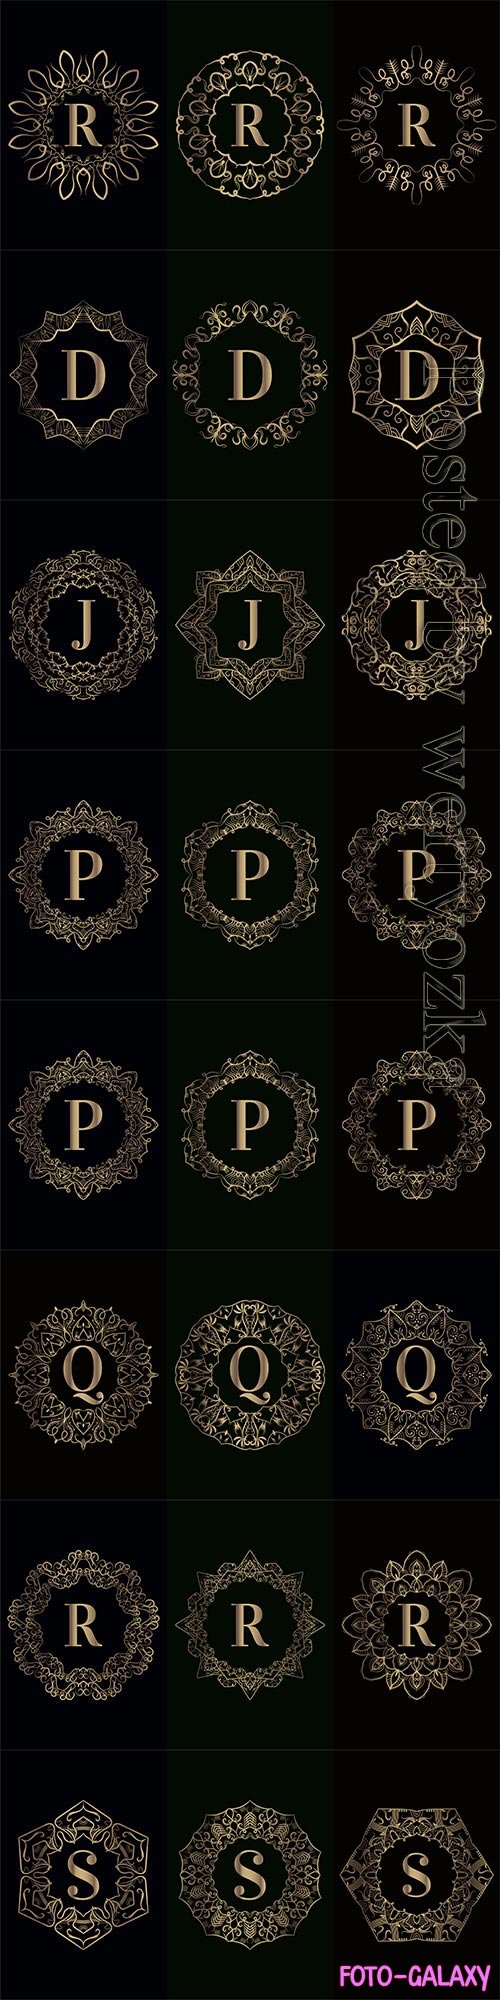 Collection of vector logo initial with luxury mandala ornament frame